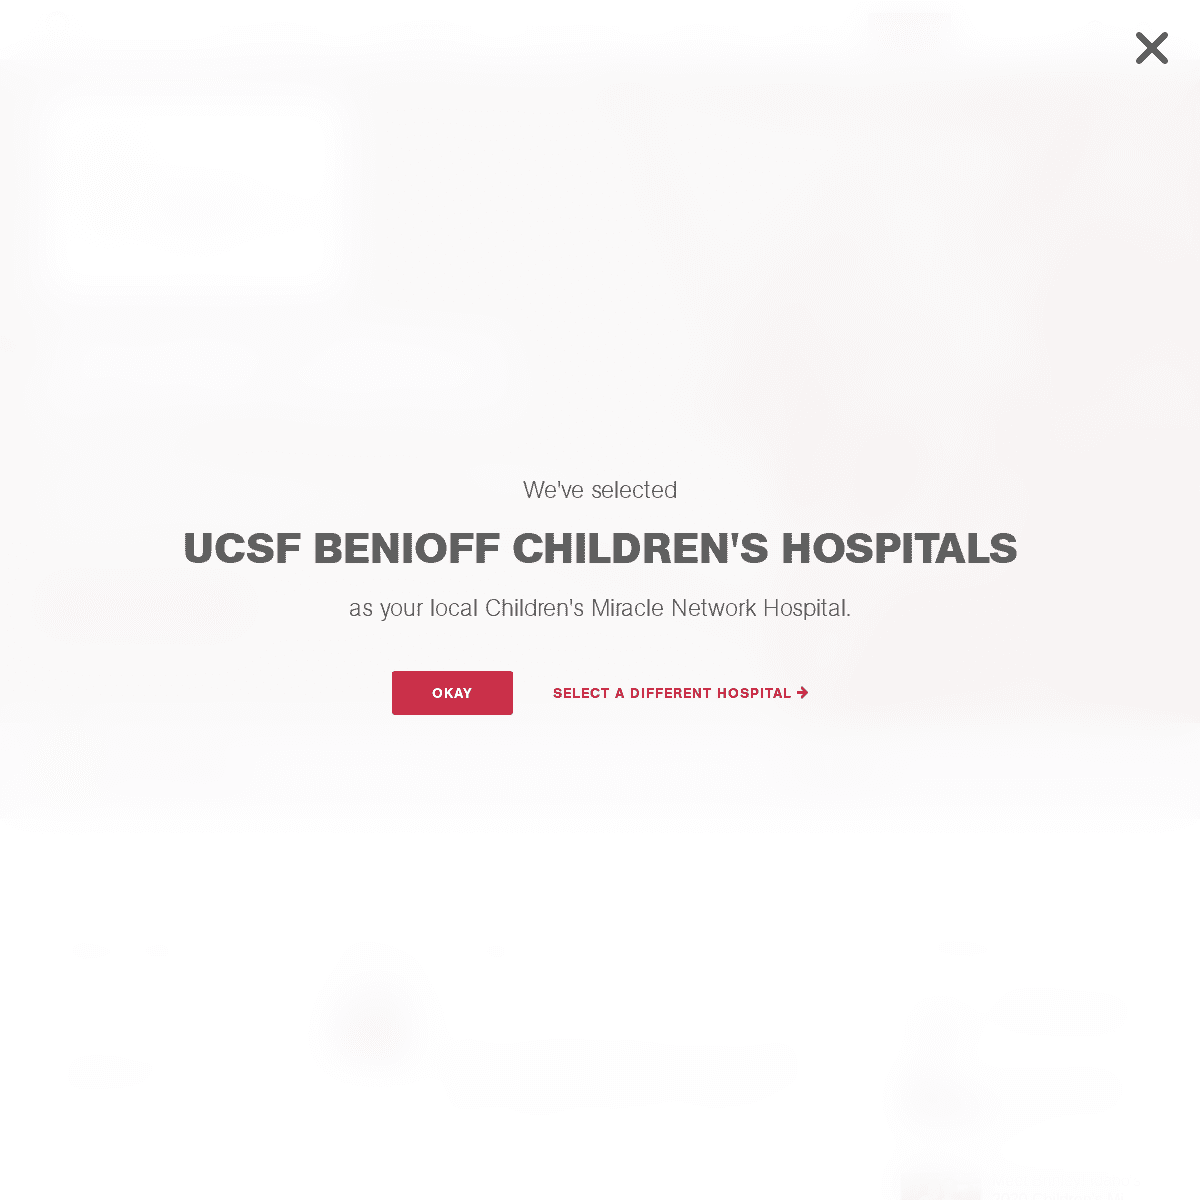 A complete backup of childrensmiraclenetworkhospitals.org